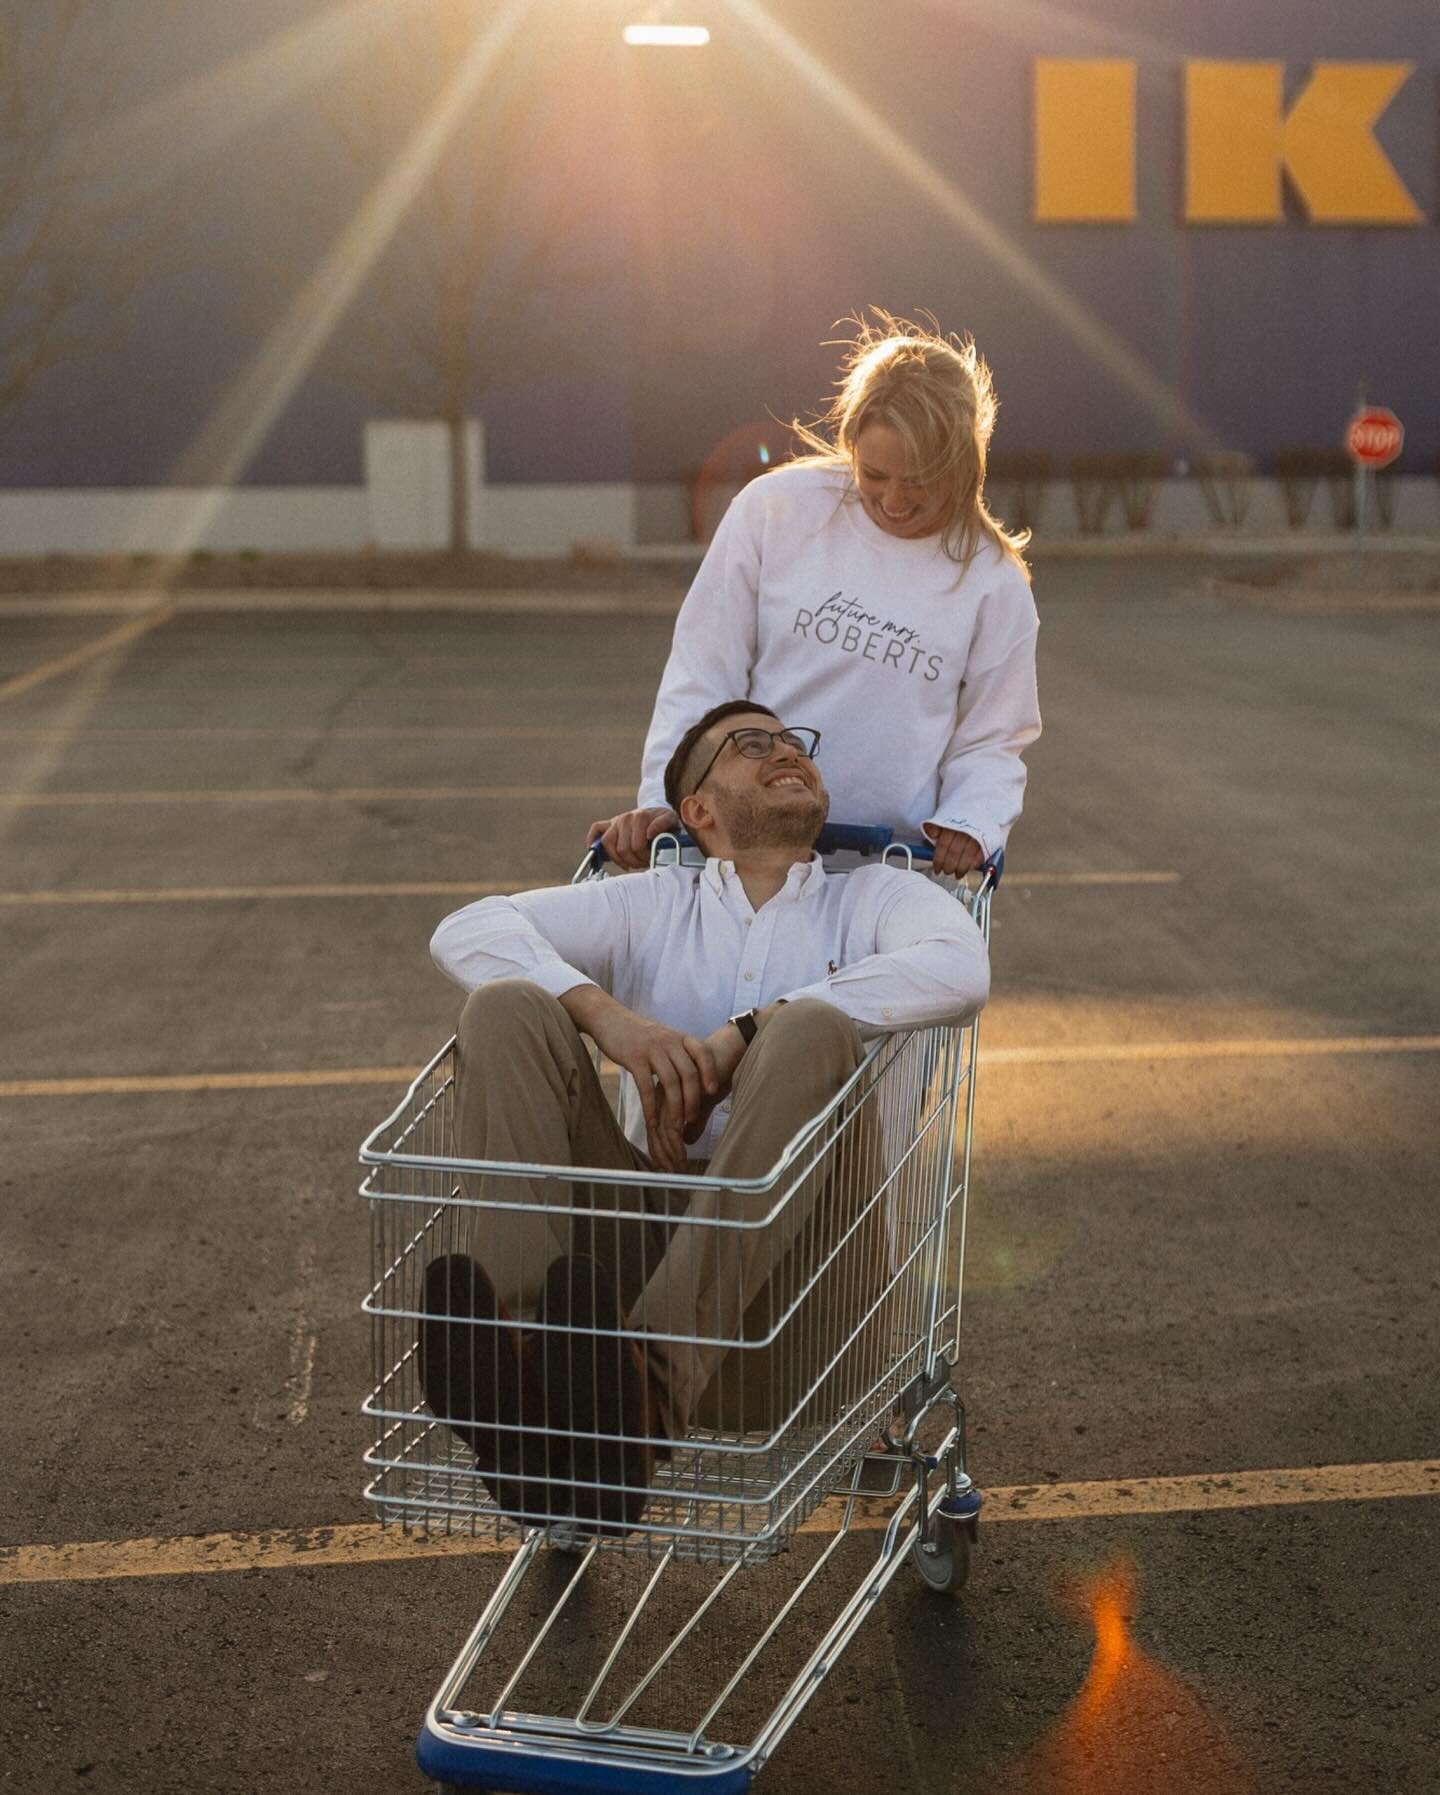 pov: you take your engagement photos at @ikea 🇸🇪✨